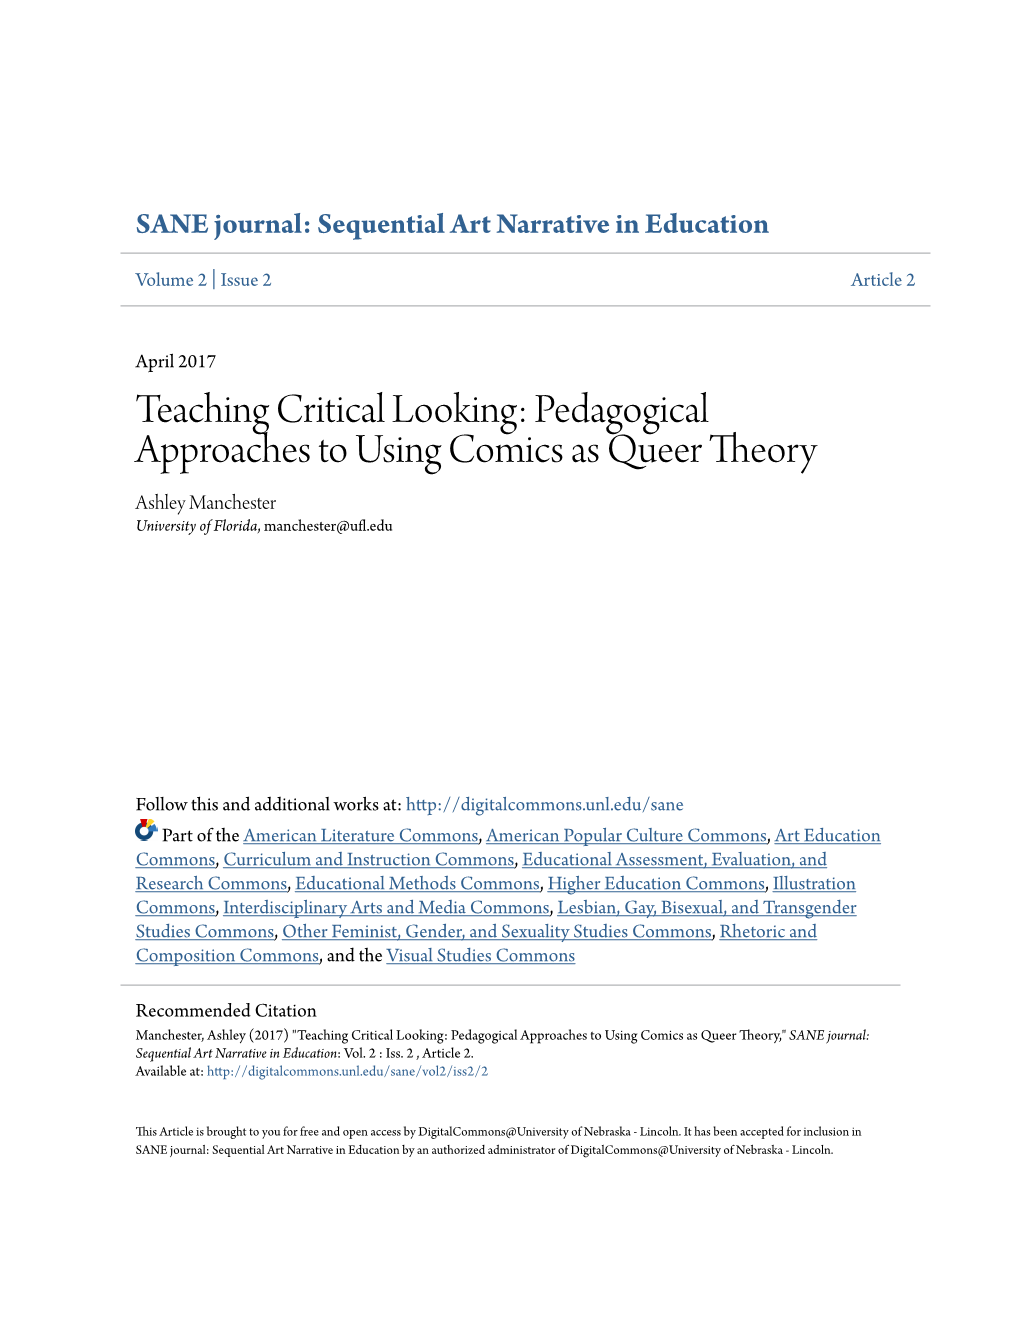 Pedagogical Approaches to Using Comics As Queer Theory Ashley Manchester University of Florida, Manchester@Ufl.Edu